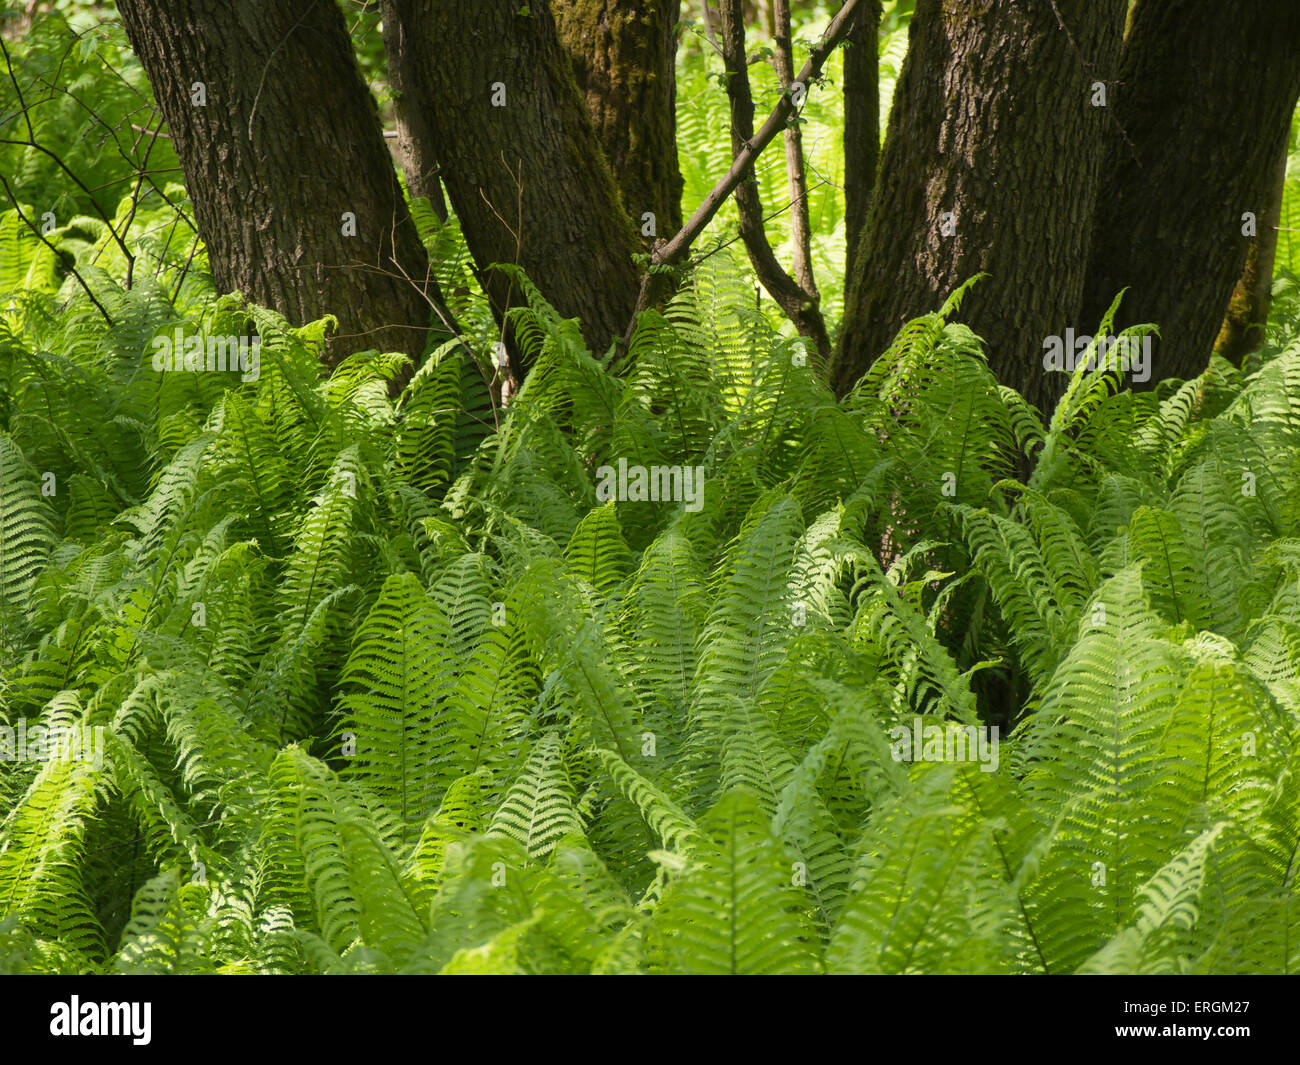 A type of fern probably Bracken, Pteridium, forest floor green carpet with dark tree trunks and sunlight reaching down Stock Photo